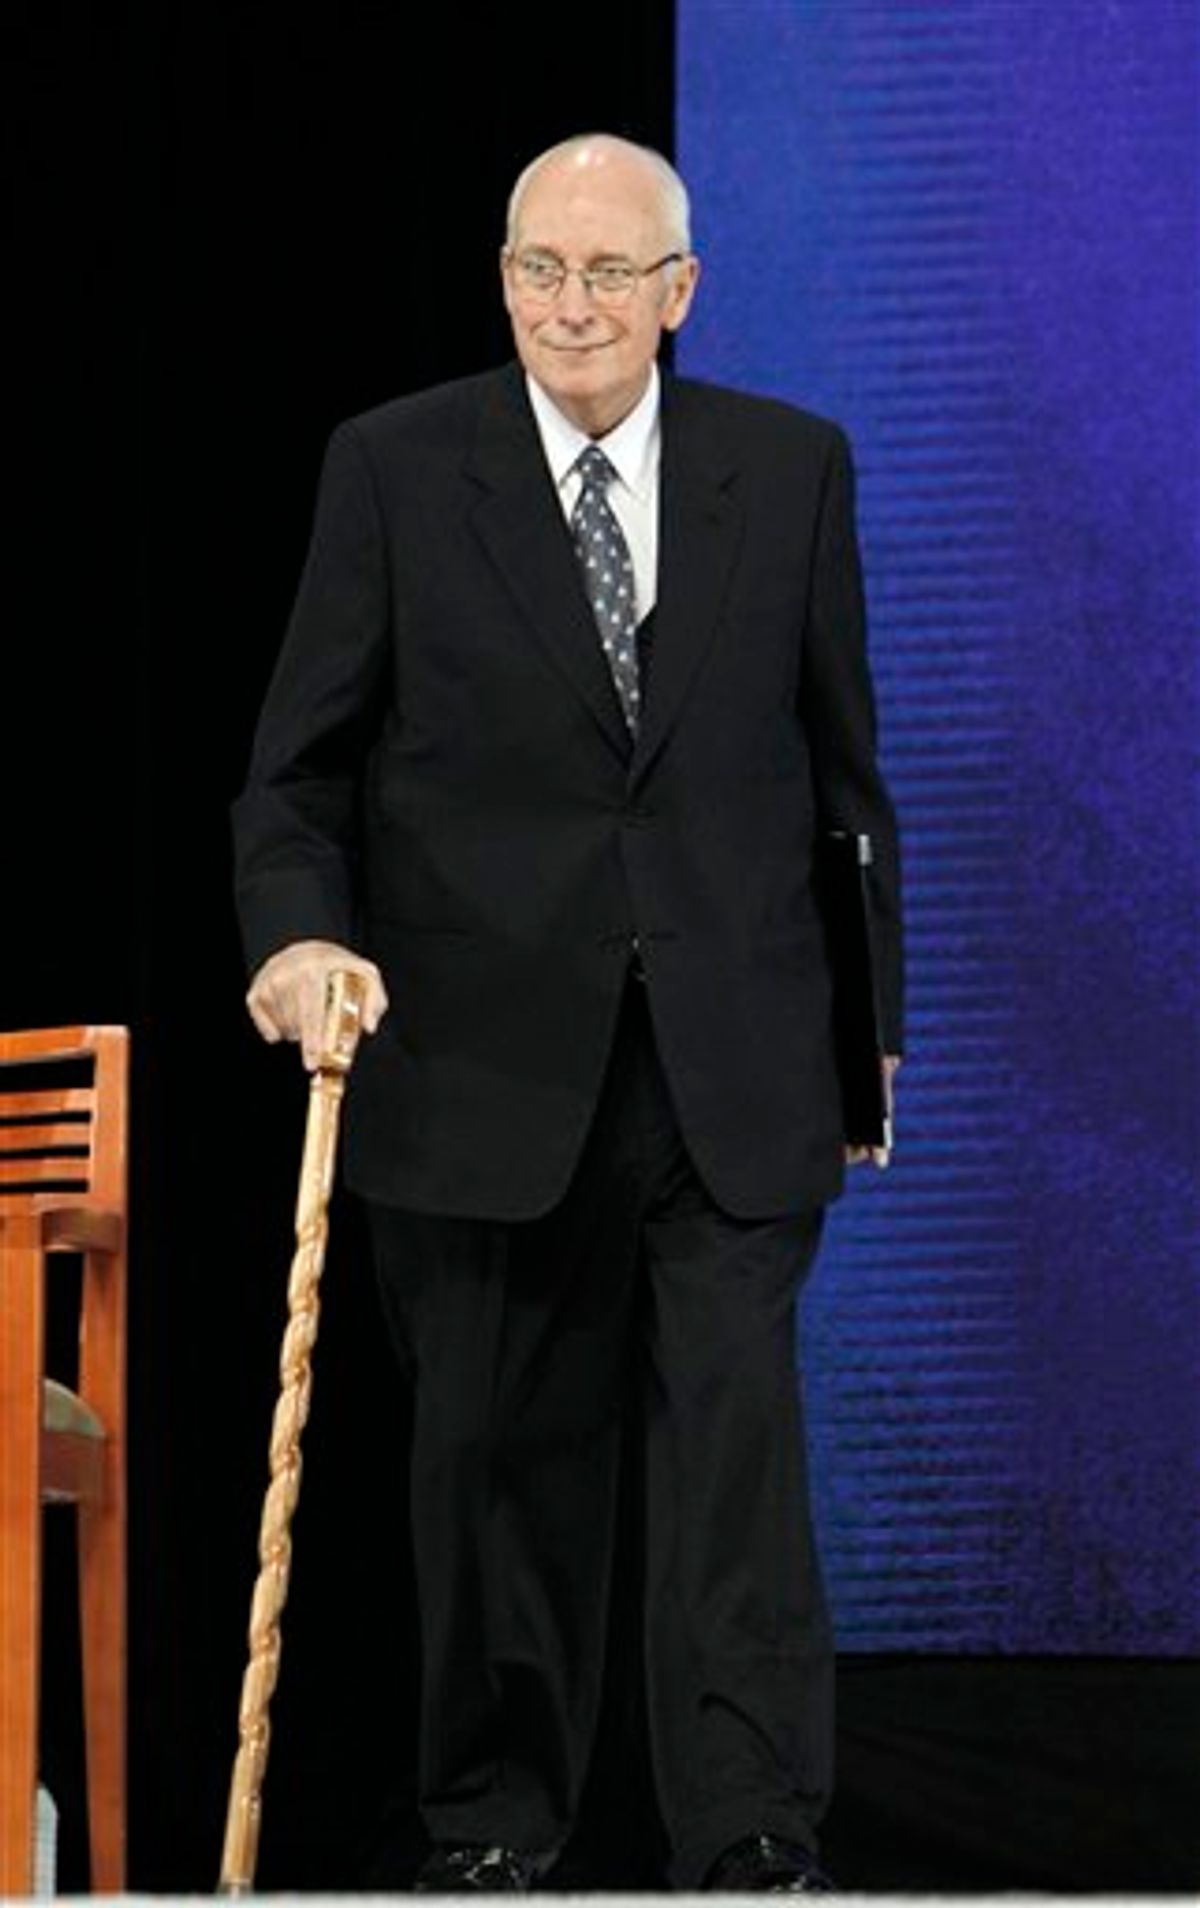 Former Vice President Dick Cheney uses a cane to walk on stage during the ground breaking ceremony for the President George W. Bush Presidential Center in Dallas,  Tuesday, Nov. 16, 2010. (AP Photo/LM Otero)  (AP)